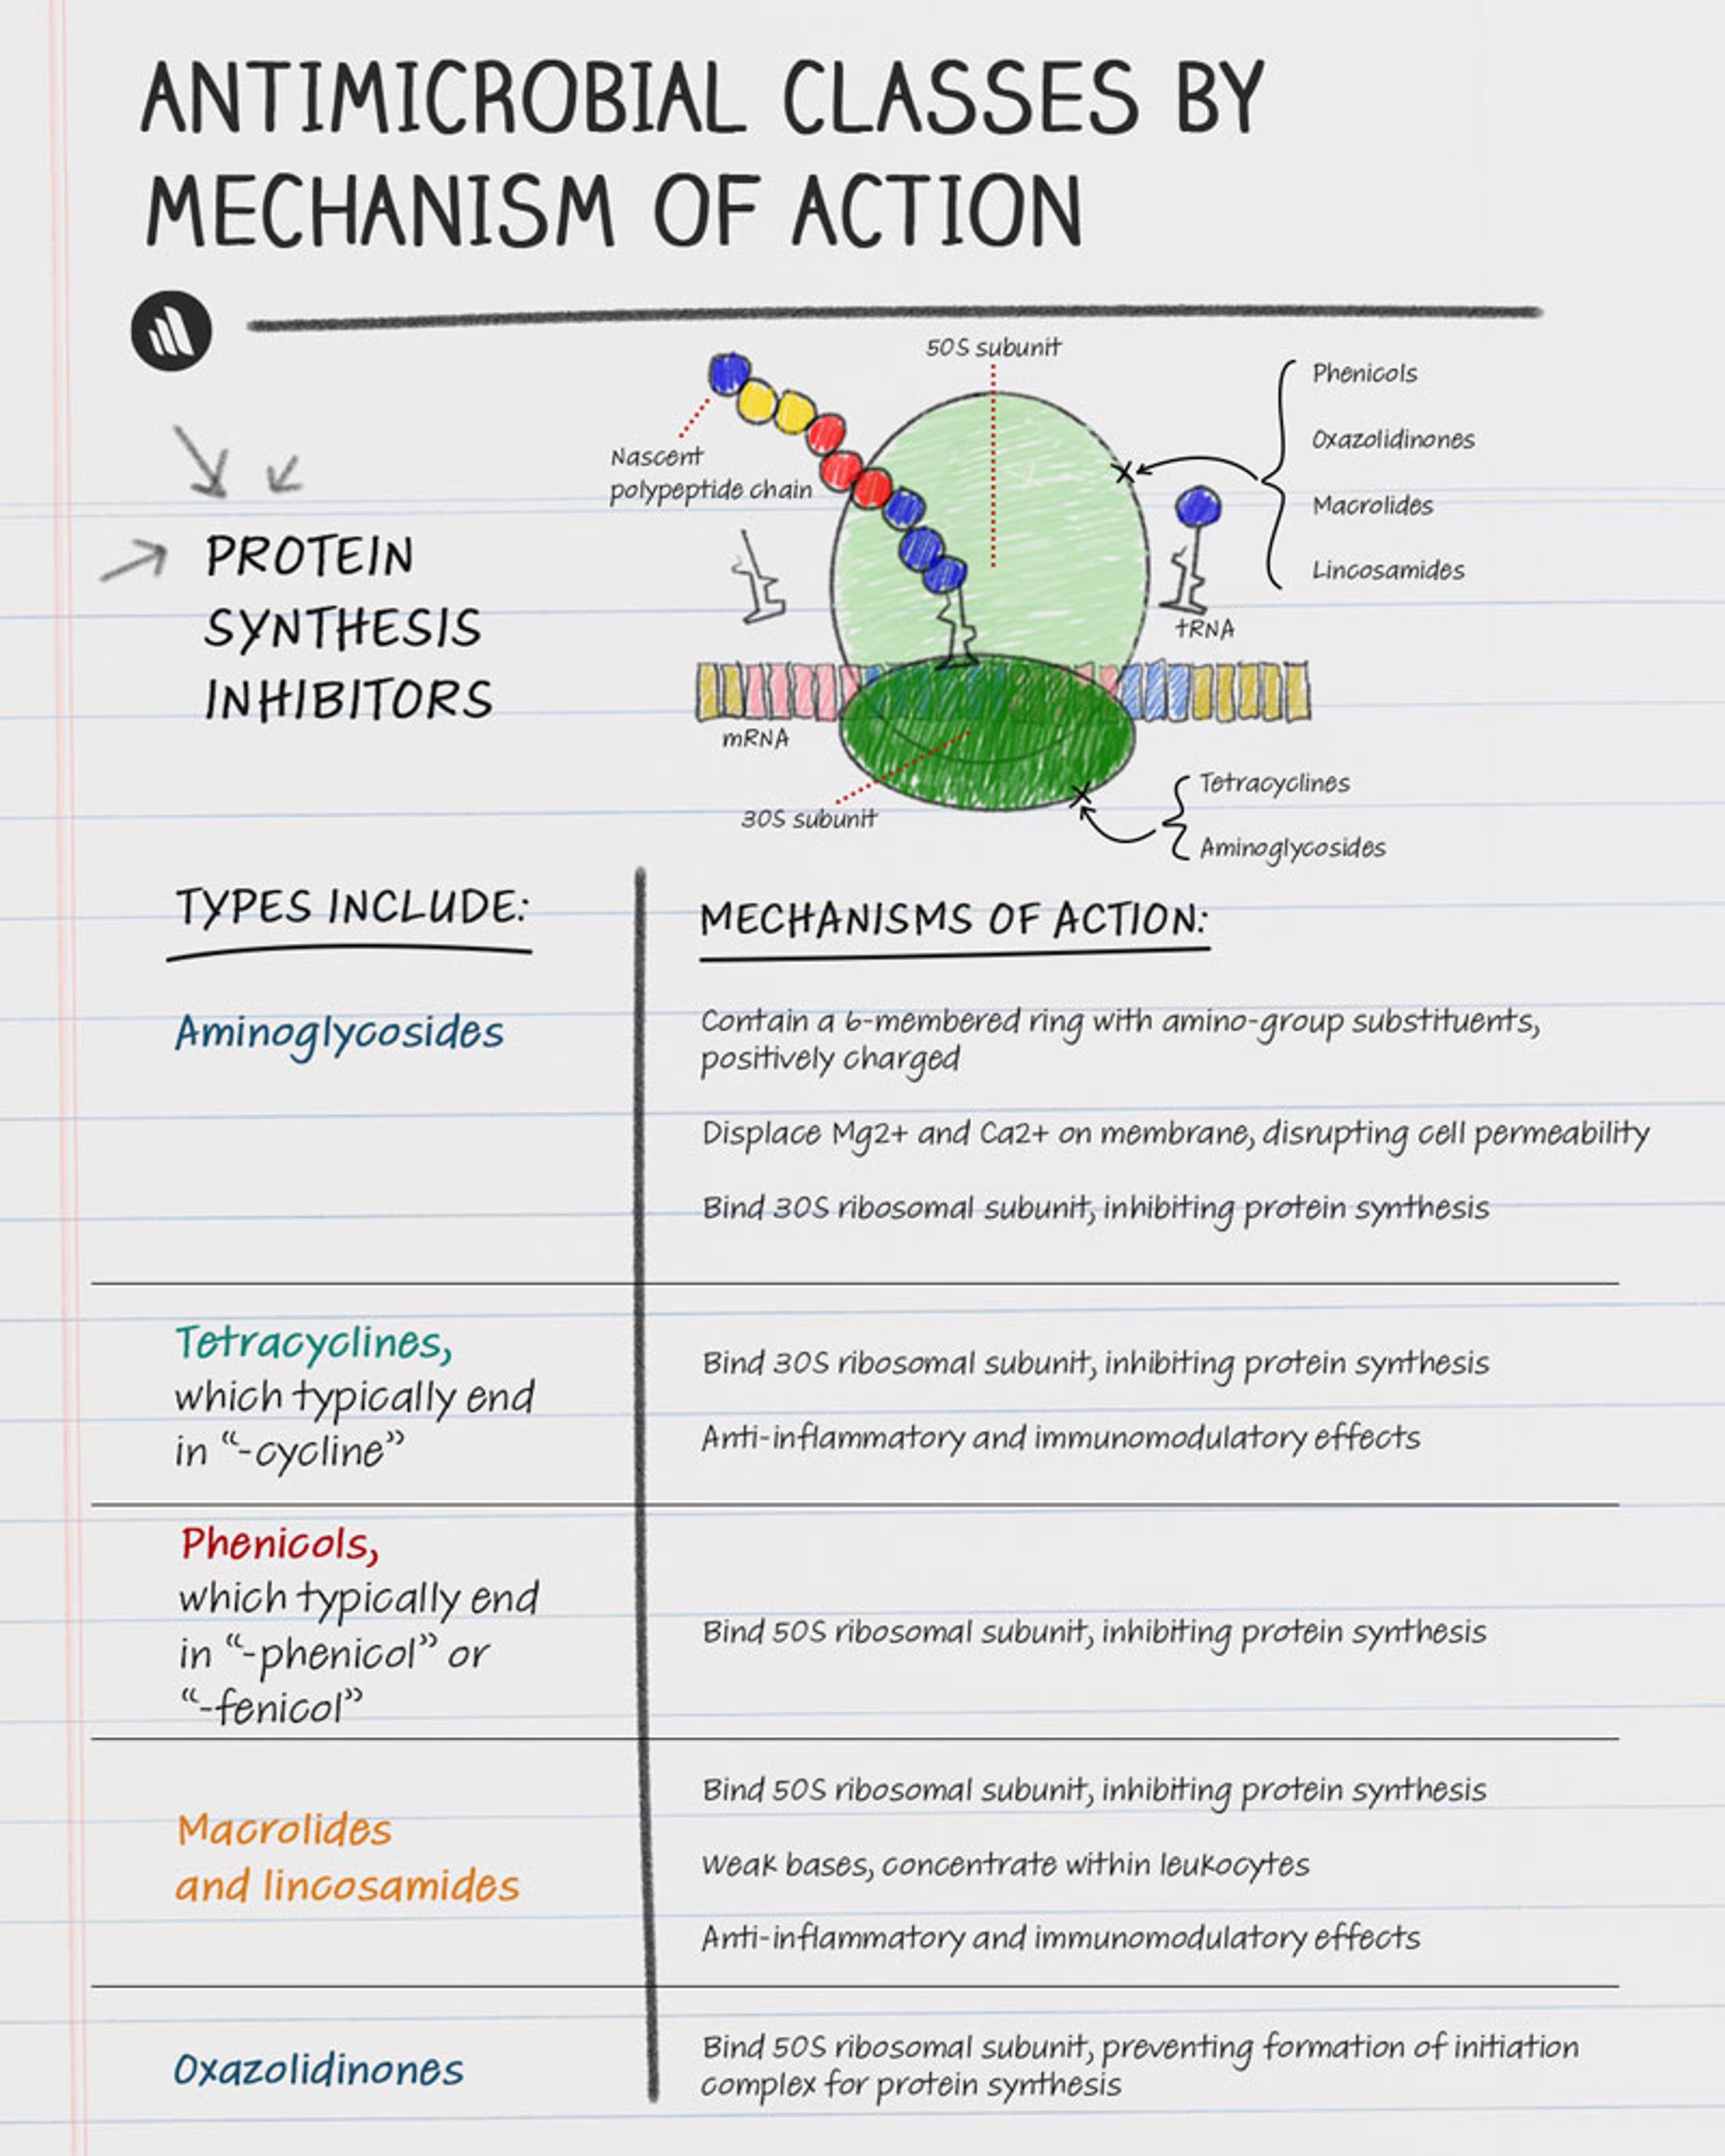 Mechanisms of Action: Protein Synthesis Inhibitors